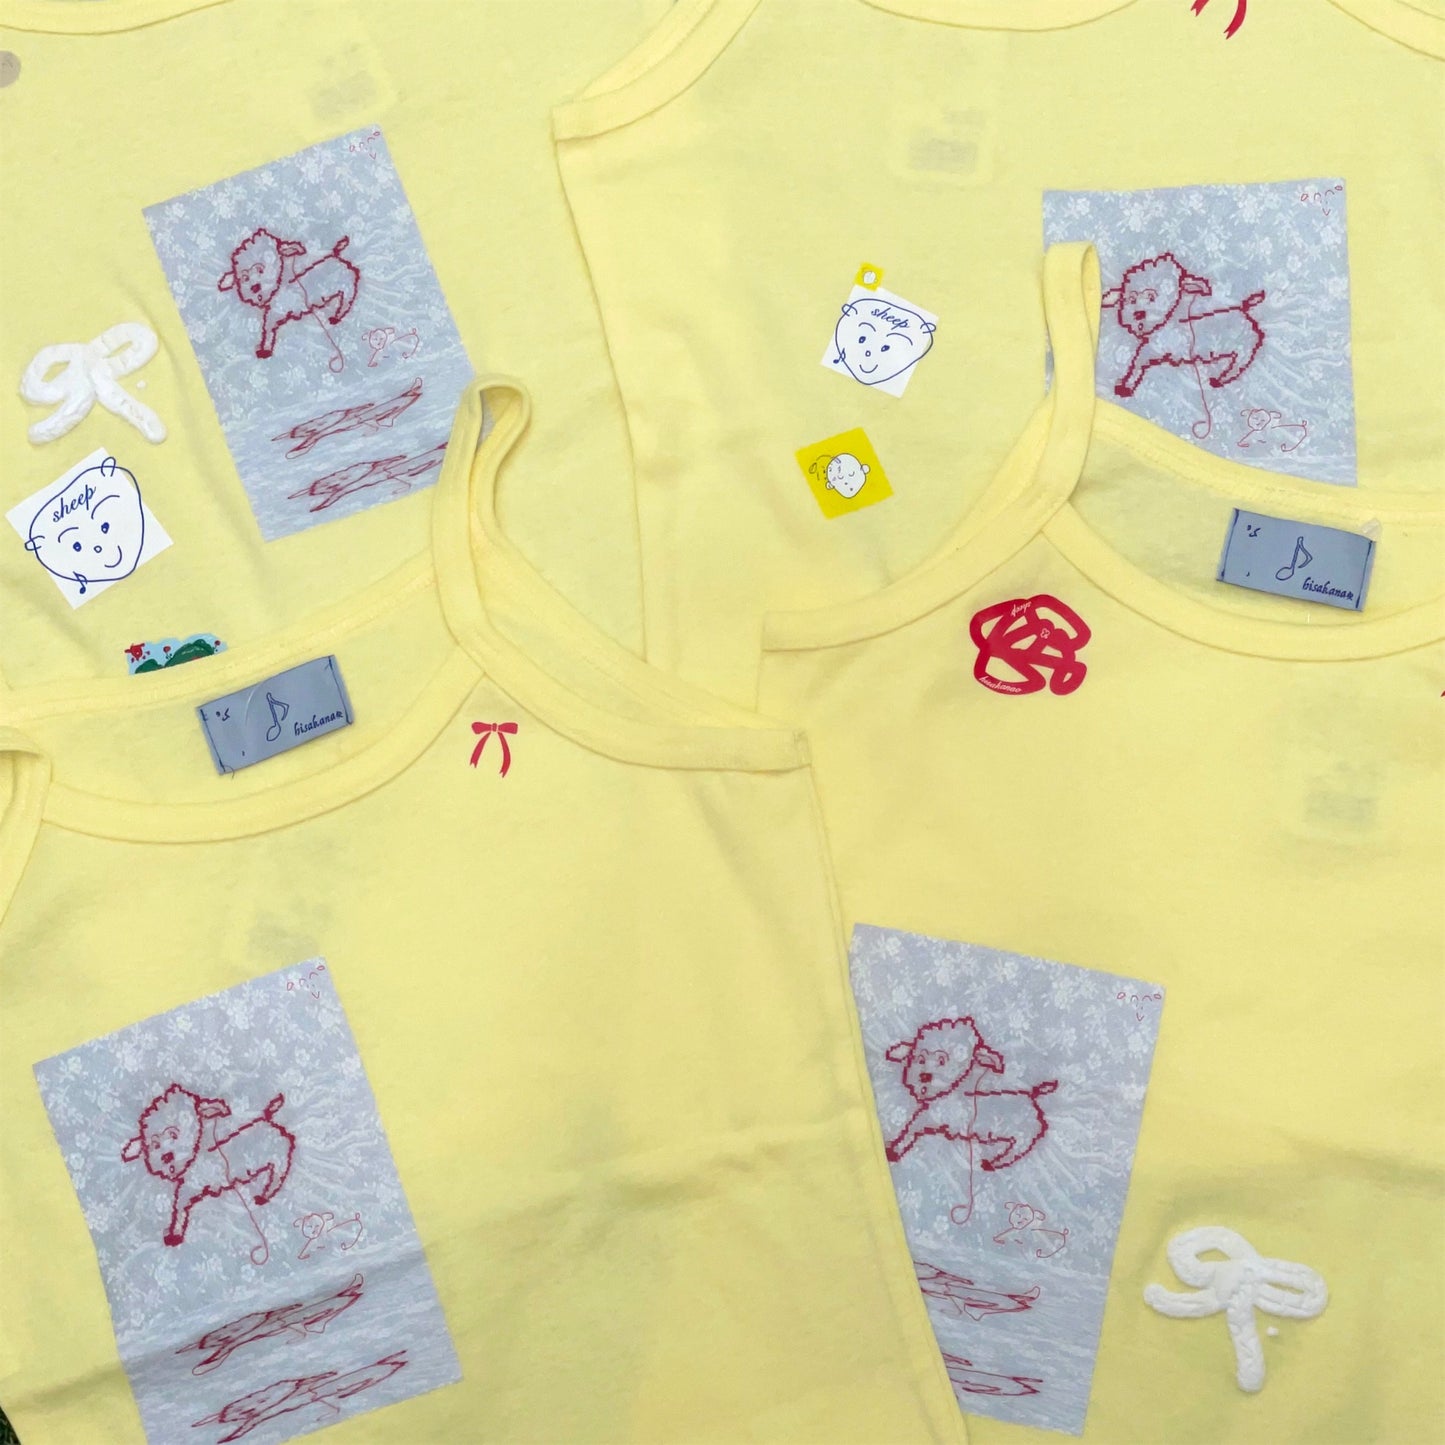 【SHEEP SOUVENIR】sheep is always here camisole / yellow / プリントキャミソール